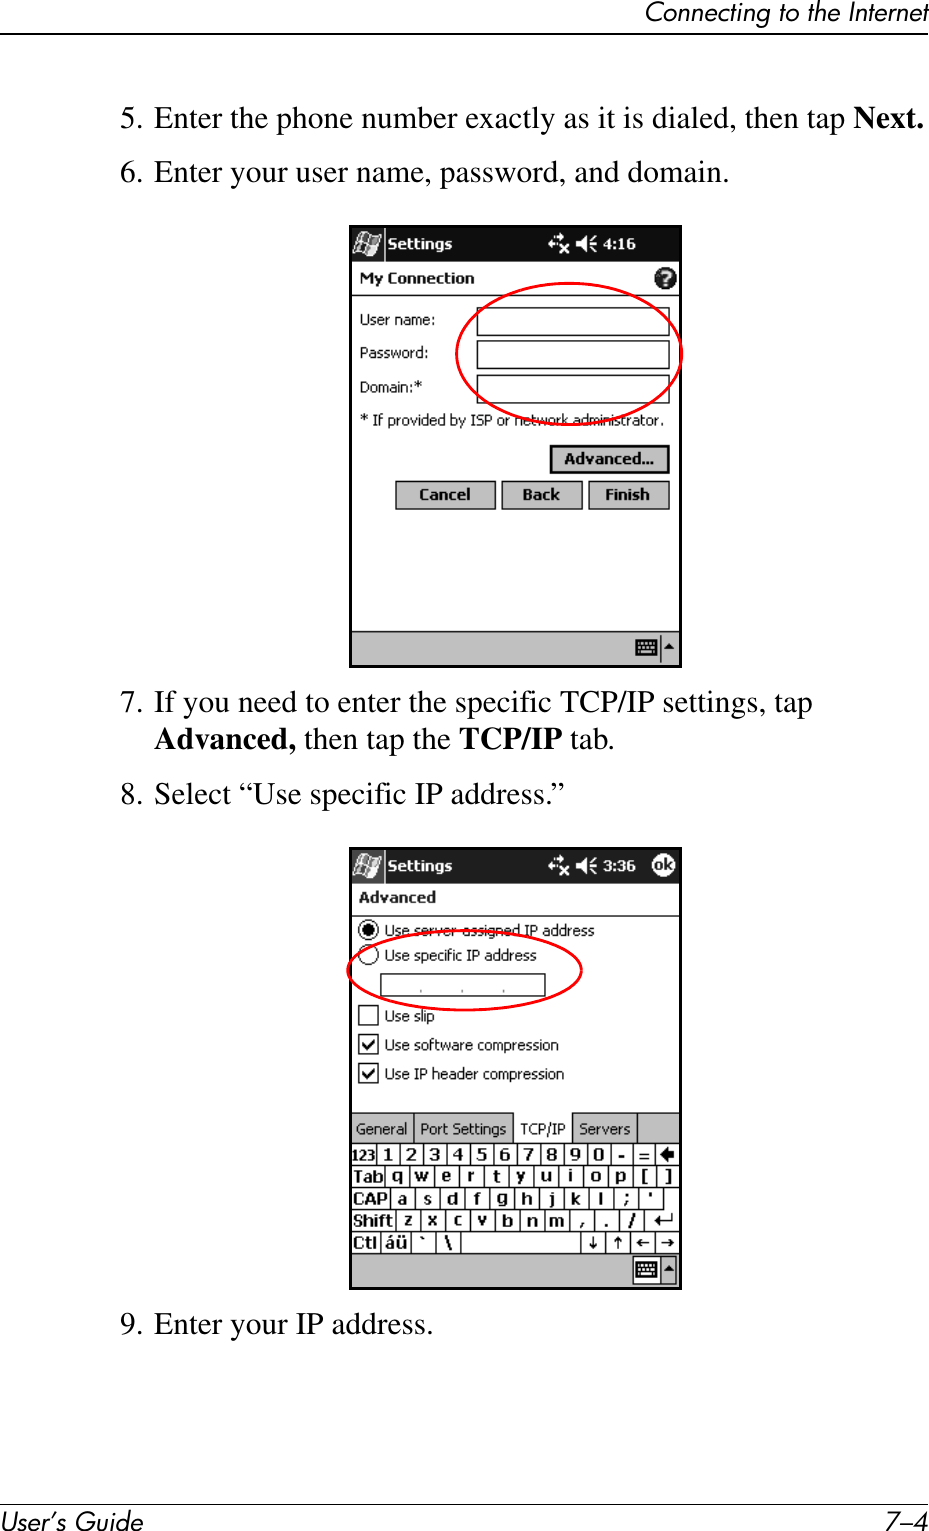 User’s Guide 7–4Connecting to the Internet5. Enter the phone number exactly as it is dialed, then tap Next.6. Enter your user name, password, and domain.7. If you need to enter the specific TCP/IP settings, tap Advanced, then tap the TCP/IP tab.8. Select “Use specific IP address.”9. Enter your IP address.